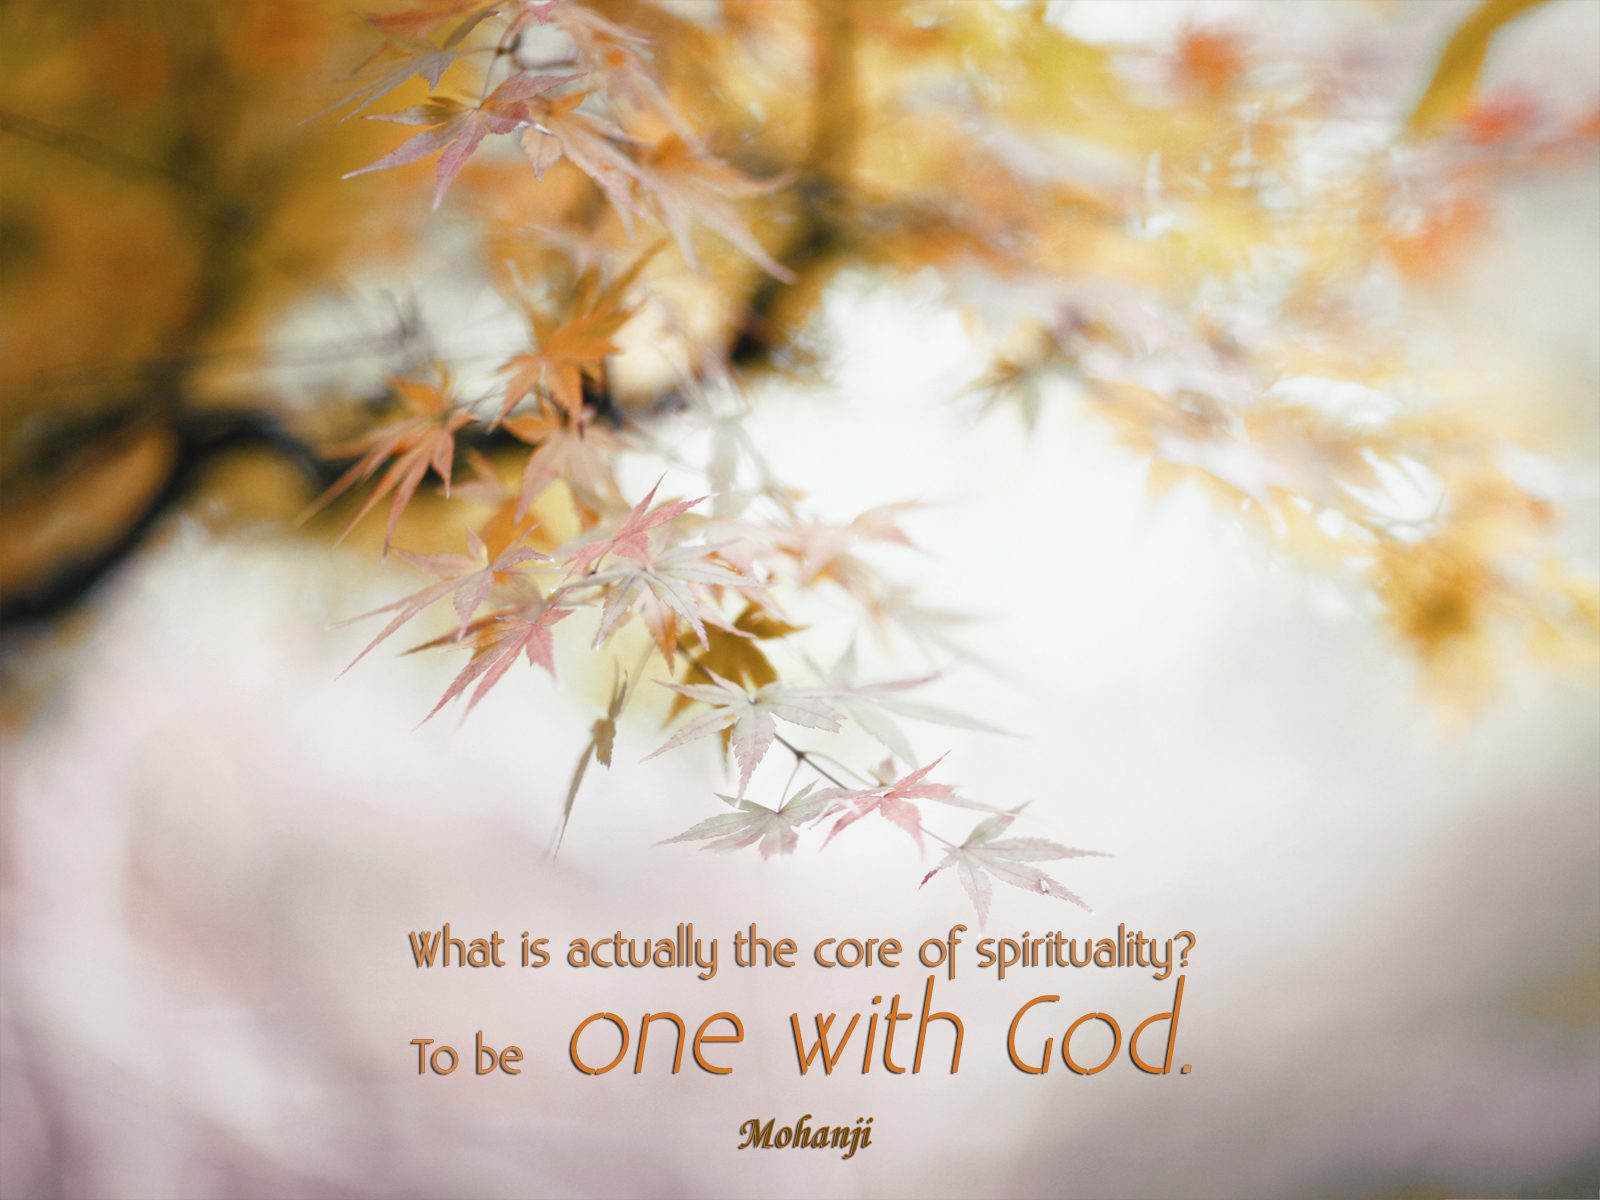 Mohanji quote - What is actually the core of spirituality